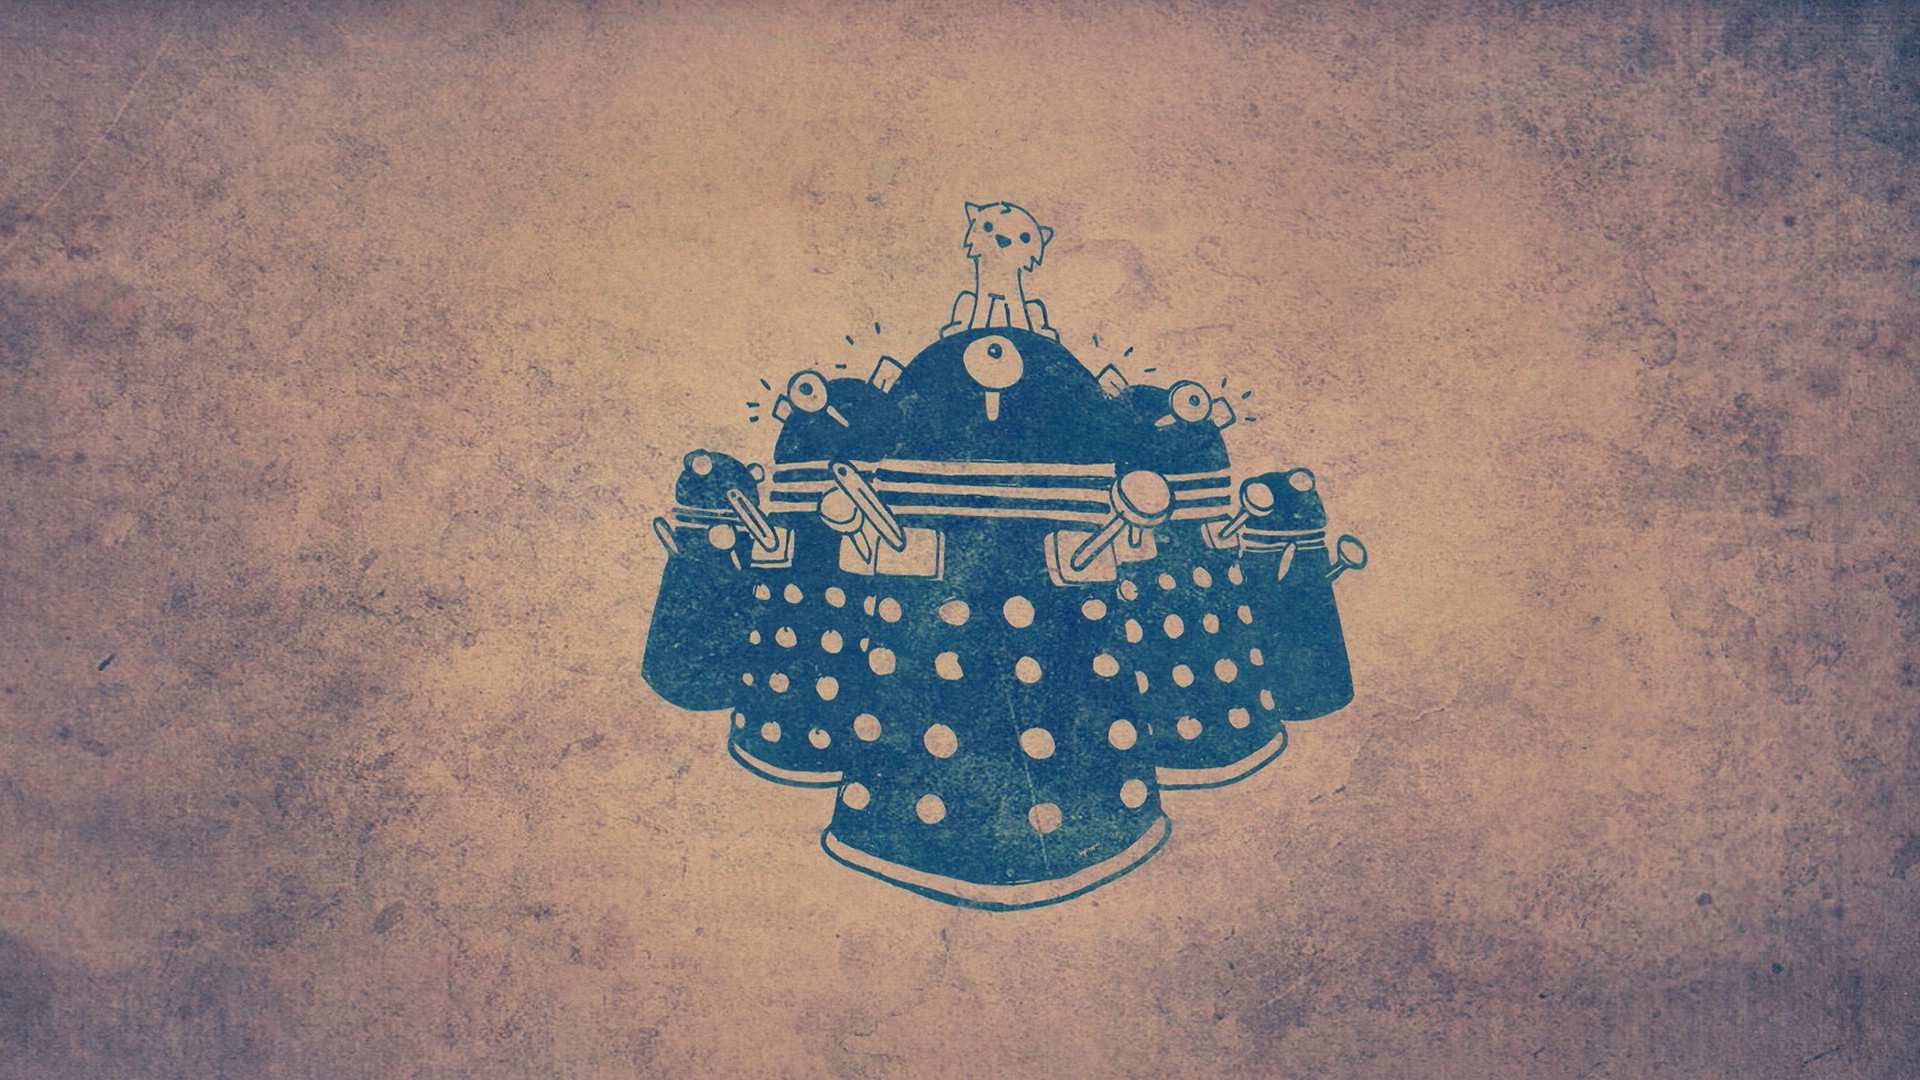 General 1920x1080 Doctor Who Daleks TV series science fiction